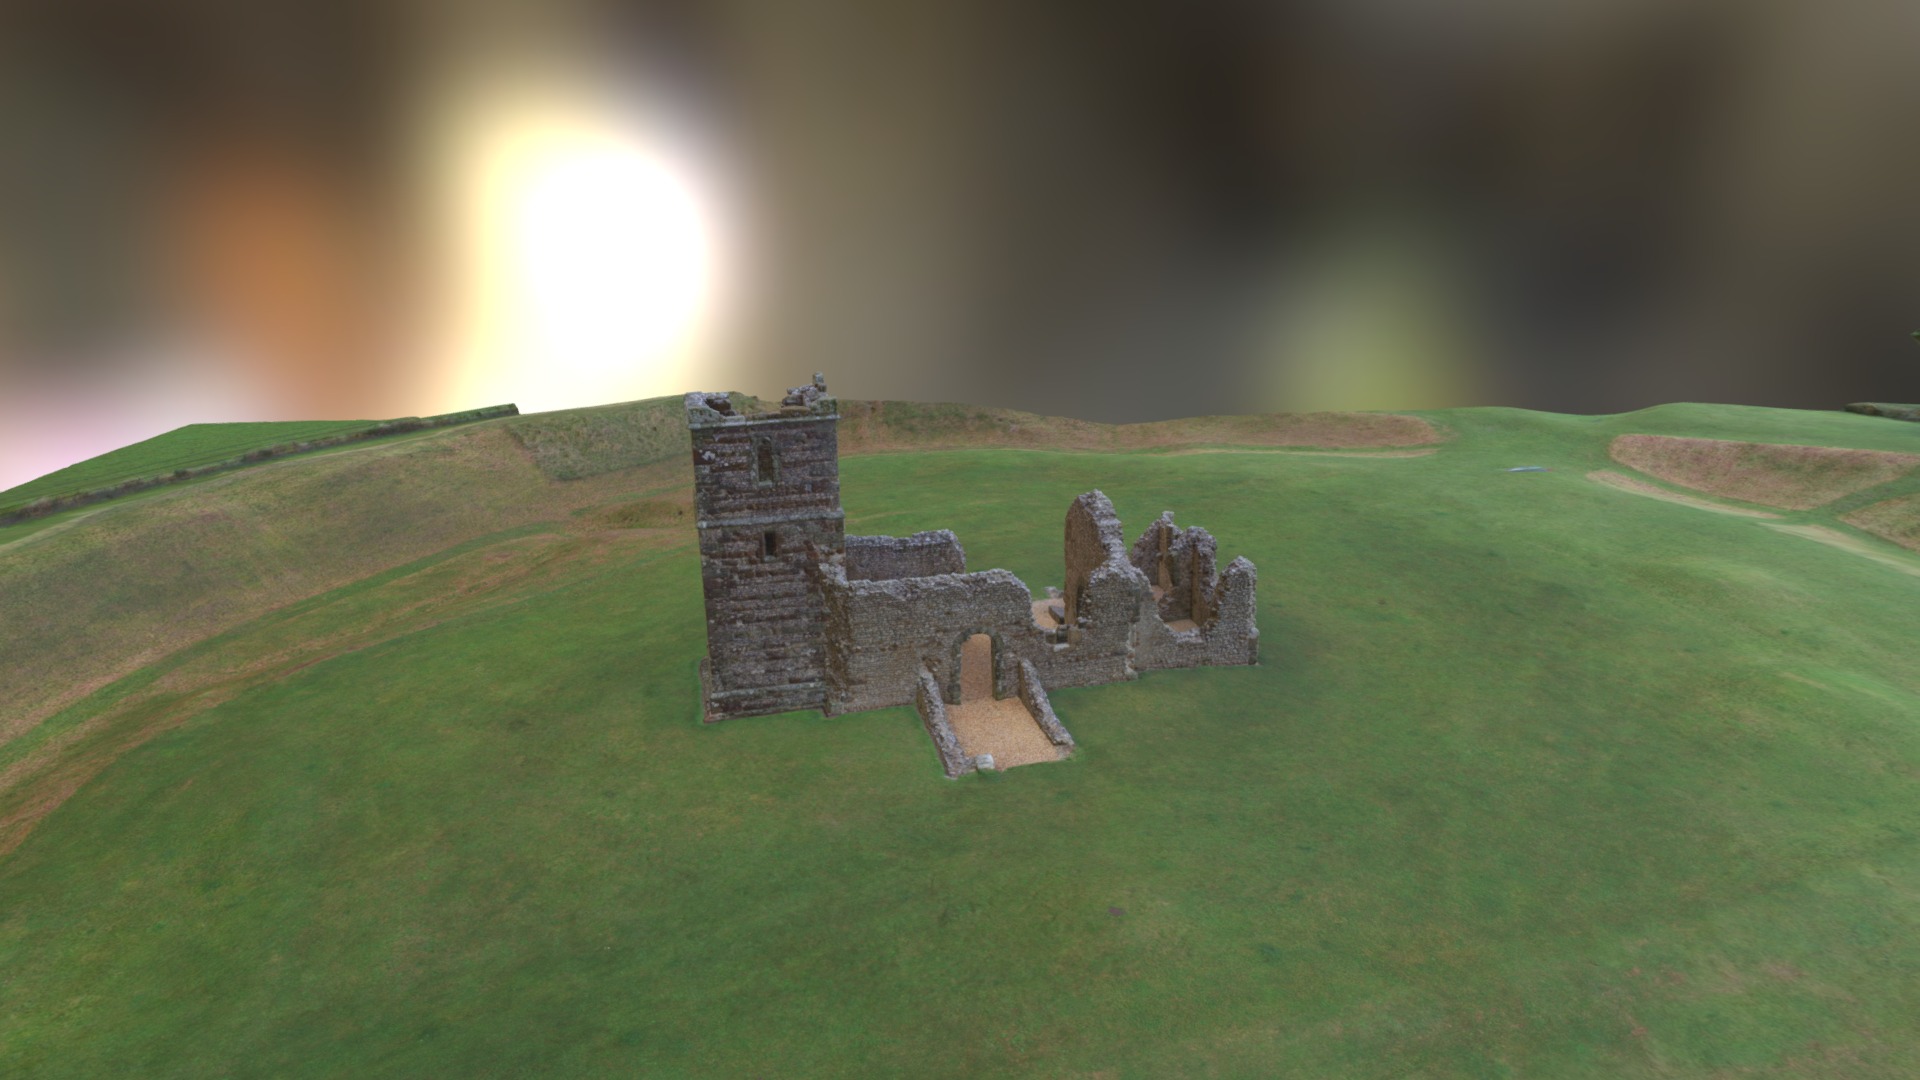 3D model Knowlton Church - This is a 3D model of the Knowlton Church. The 3D model is about a video game of a castle on a green field.